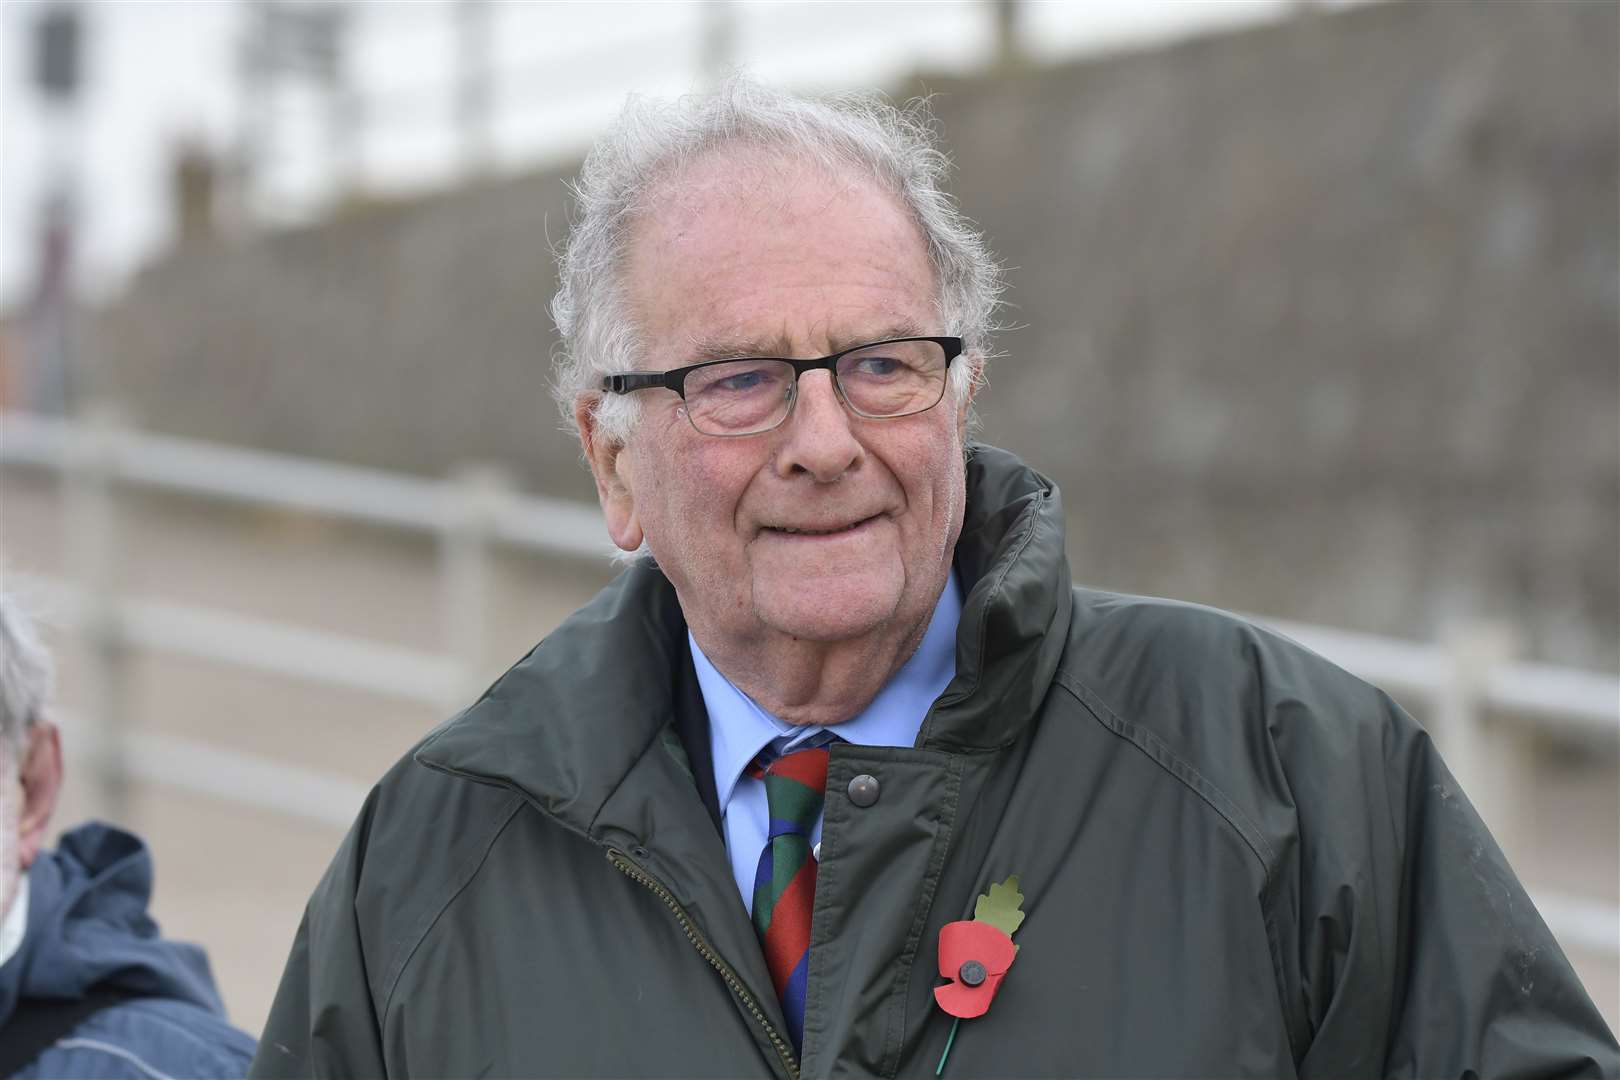 North Thanet MP Sir Roger Gale